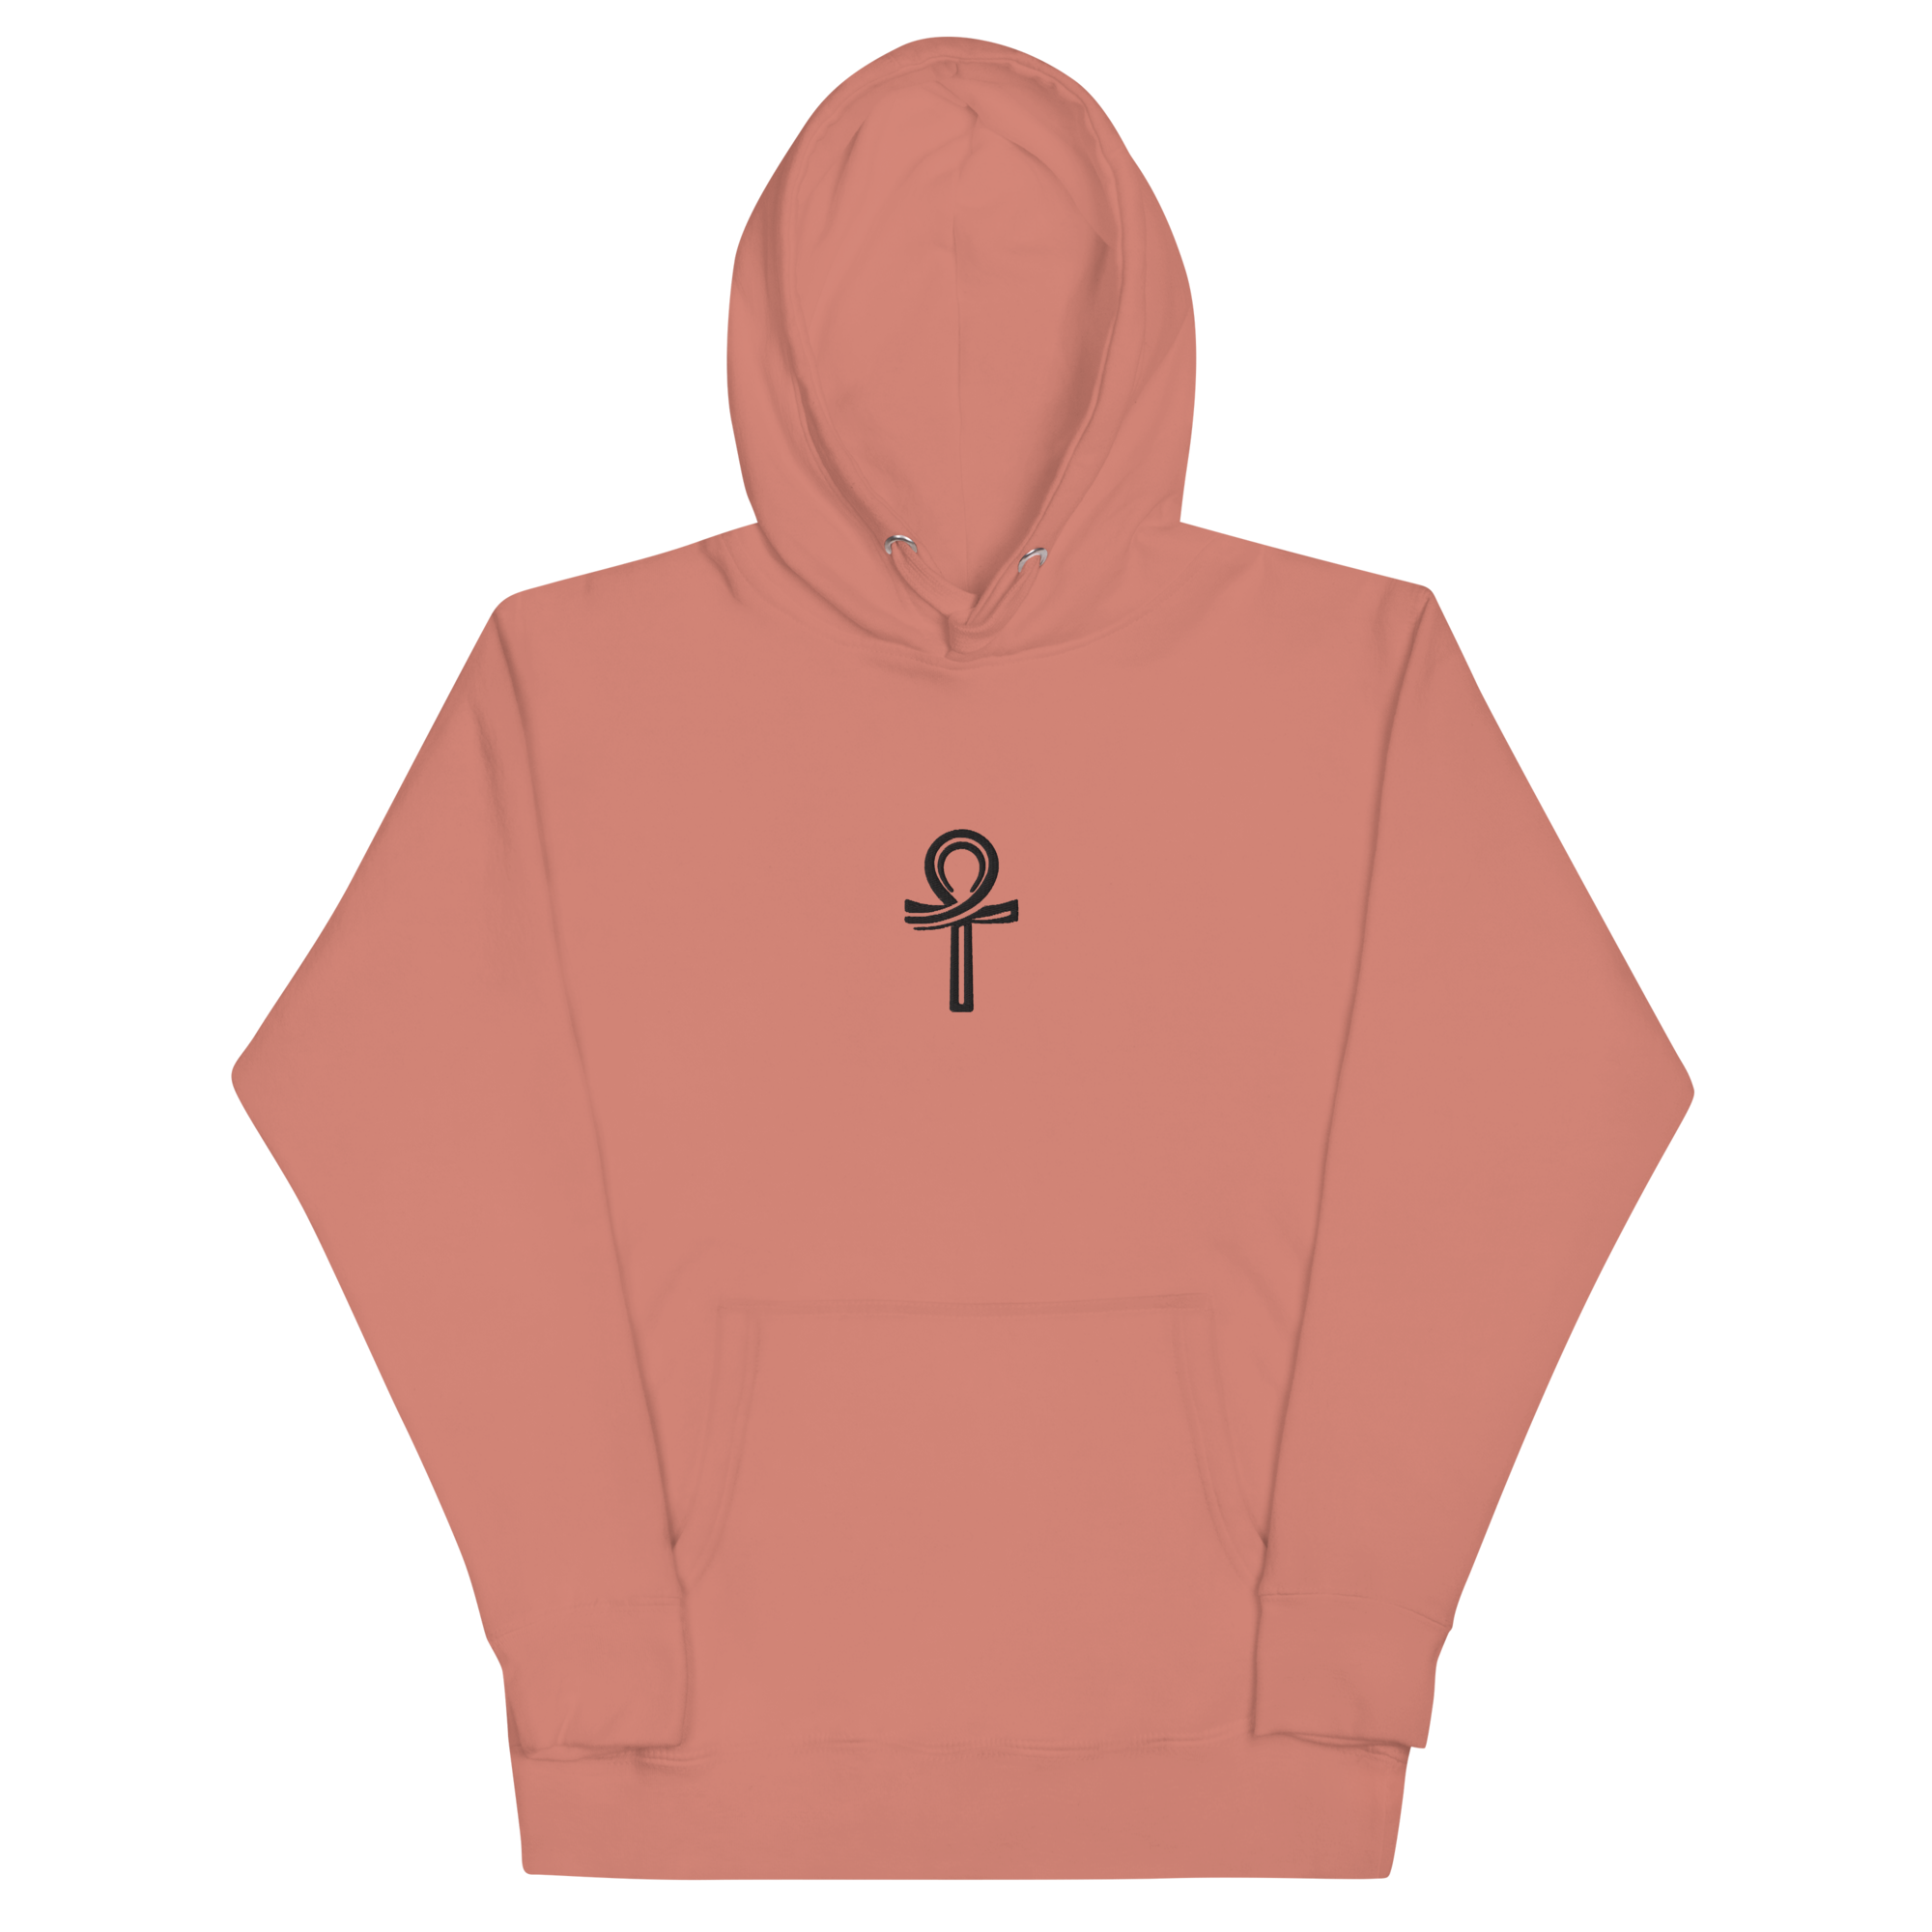 Ankh - Life's Language Embroidered Hoodie